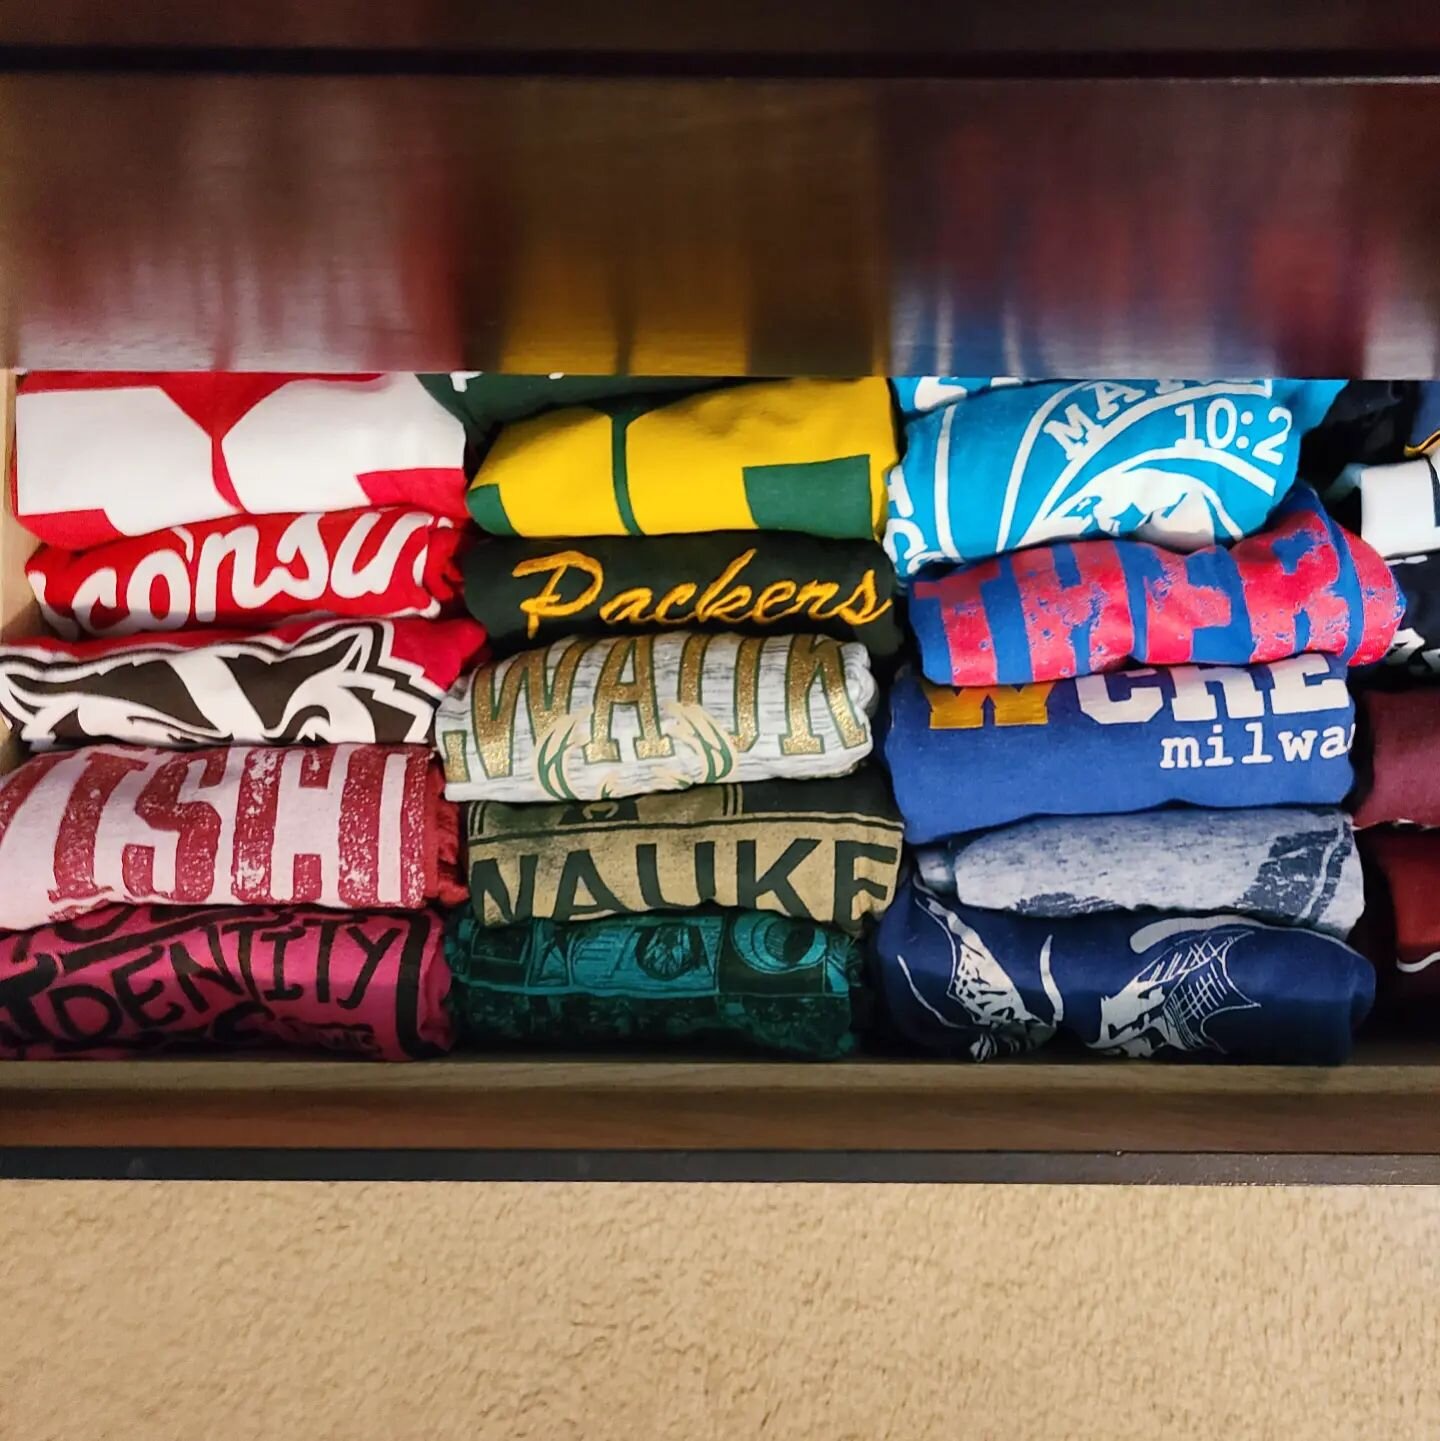 File-folding your shirts can be a game changer 👕

Let me know if you want a video tutorial on how to change your T-shirt drawers forever!